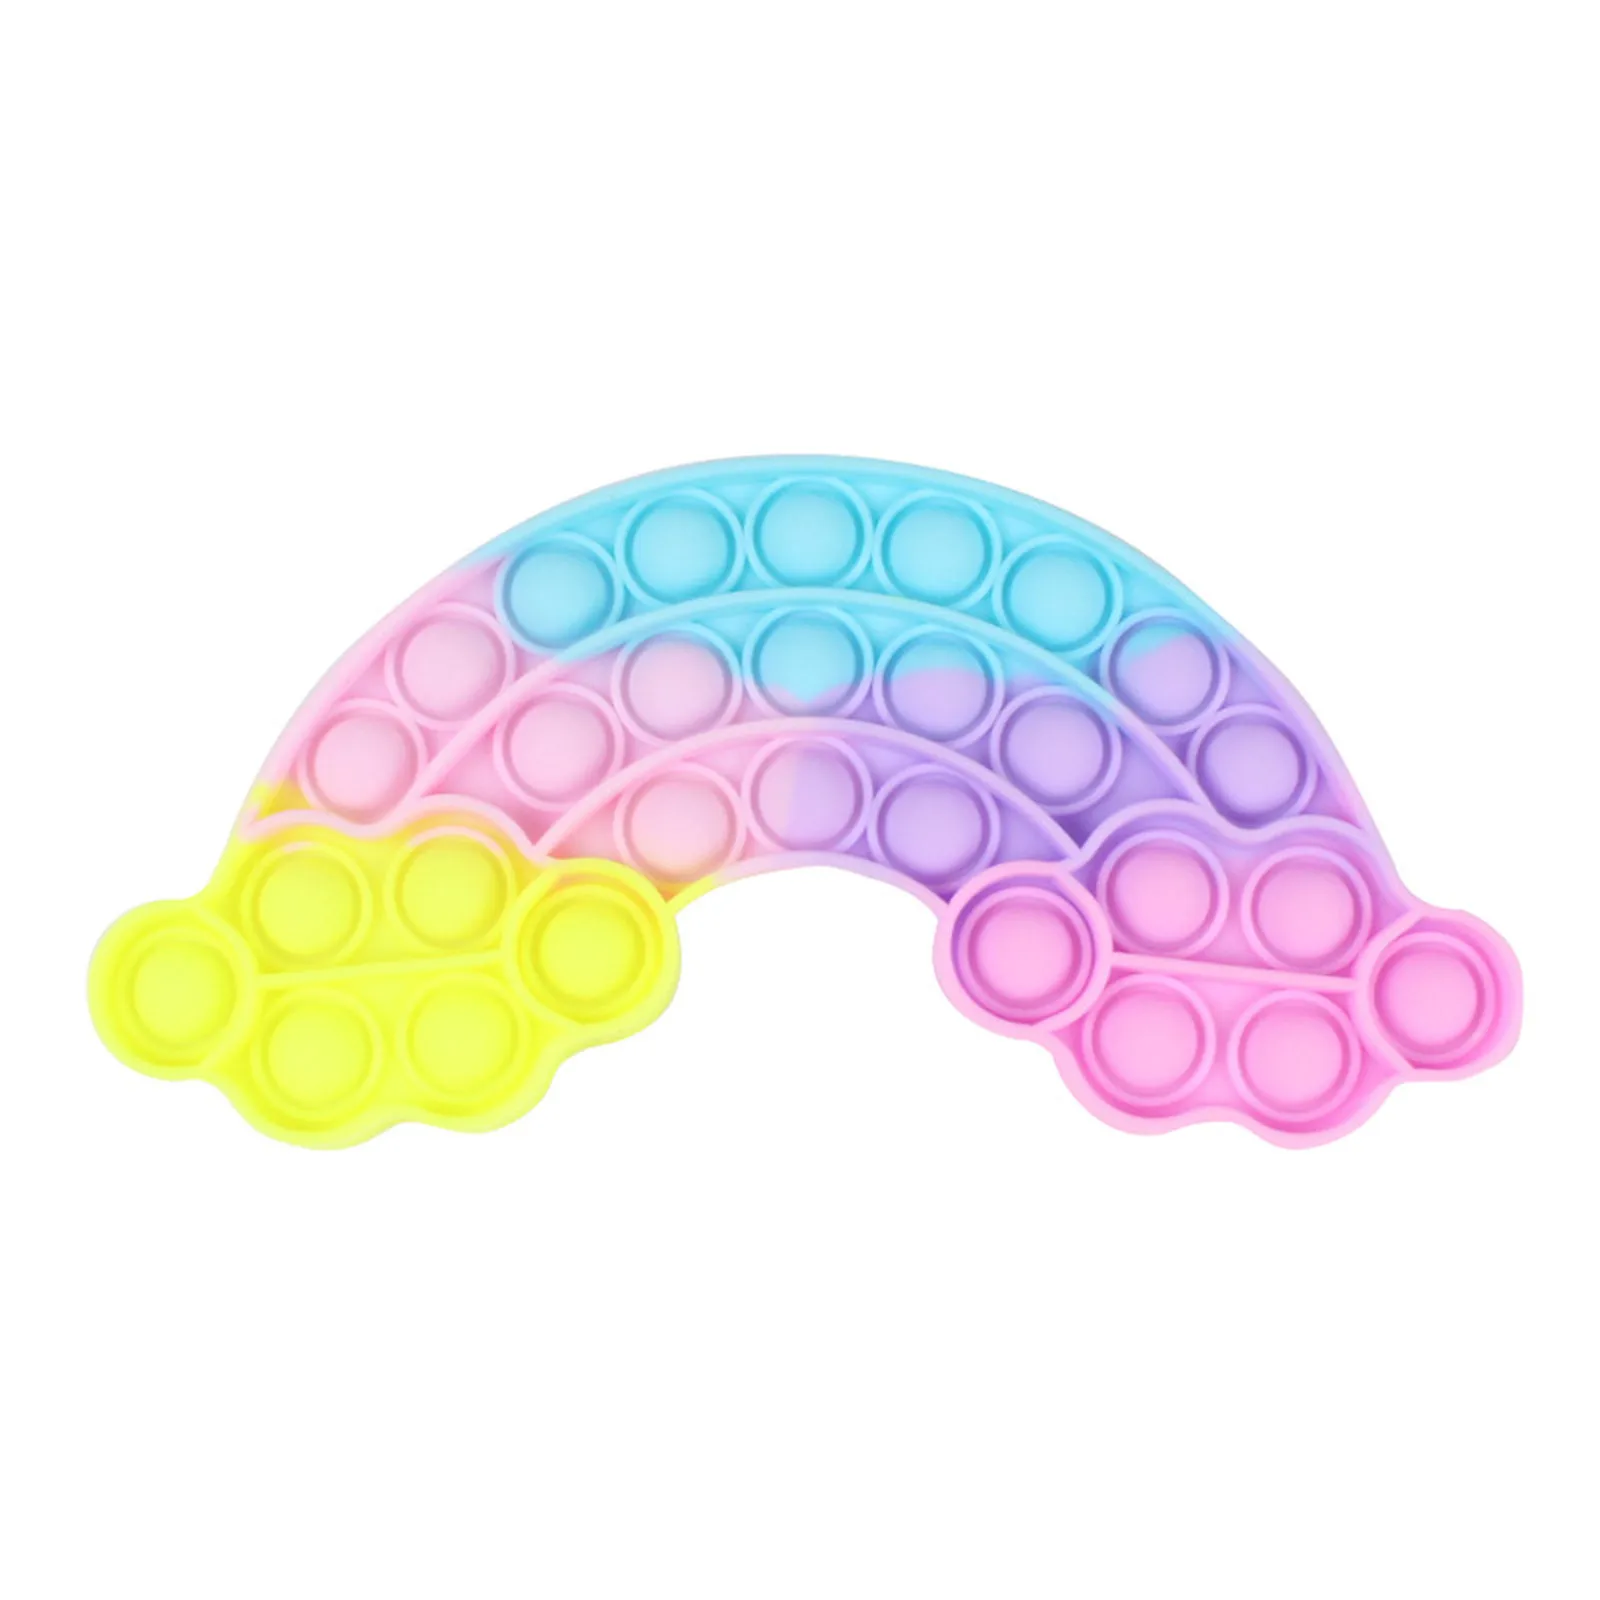 Push Popite Bubble Sensory Fidget Toys Hot New Adult Stress Relief Table Top Anti-stress Its Soft Squeeze Decompression Toys squeeze stress ball